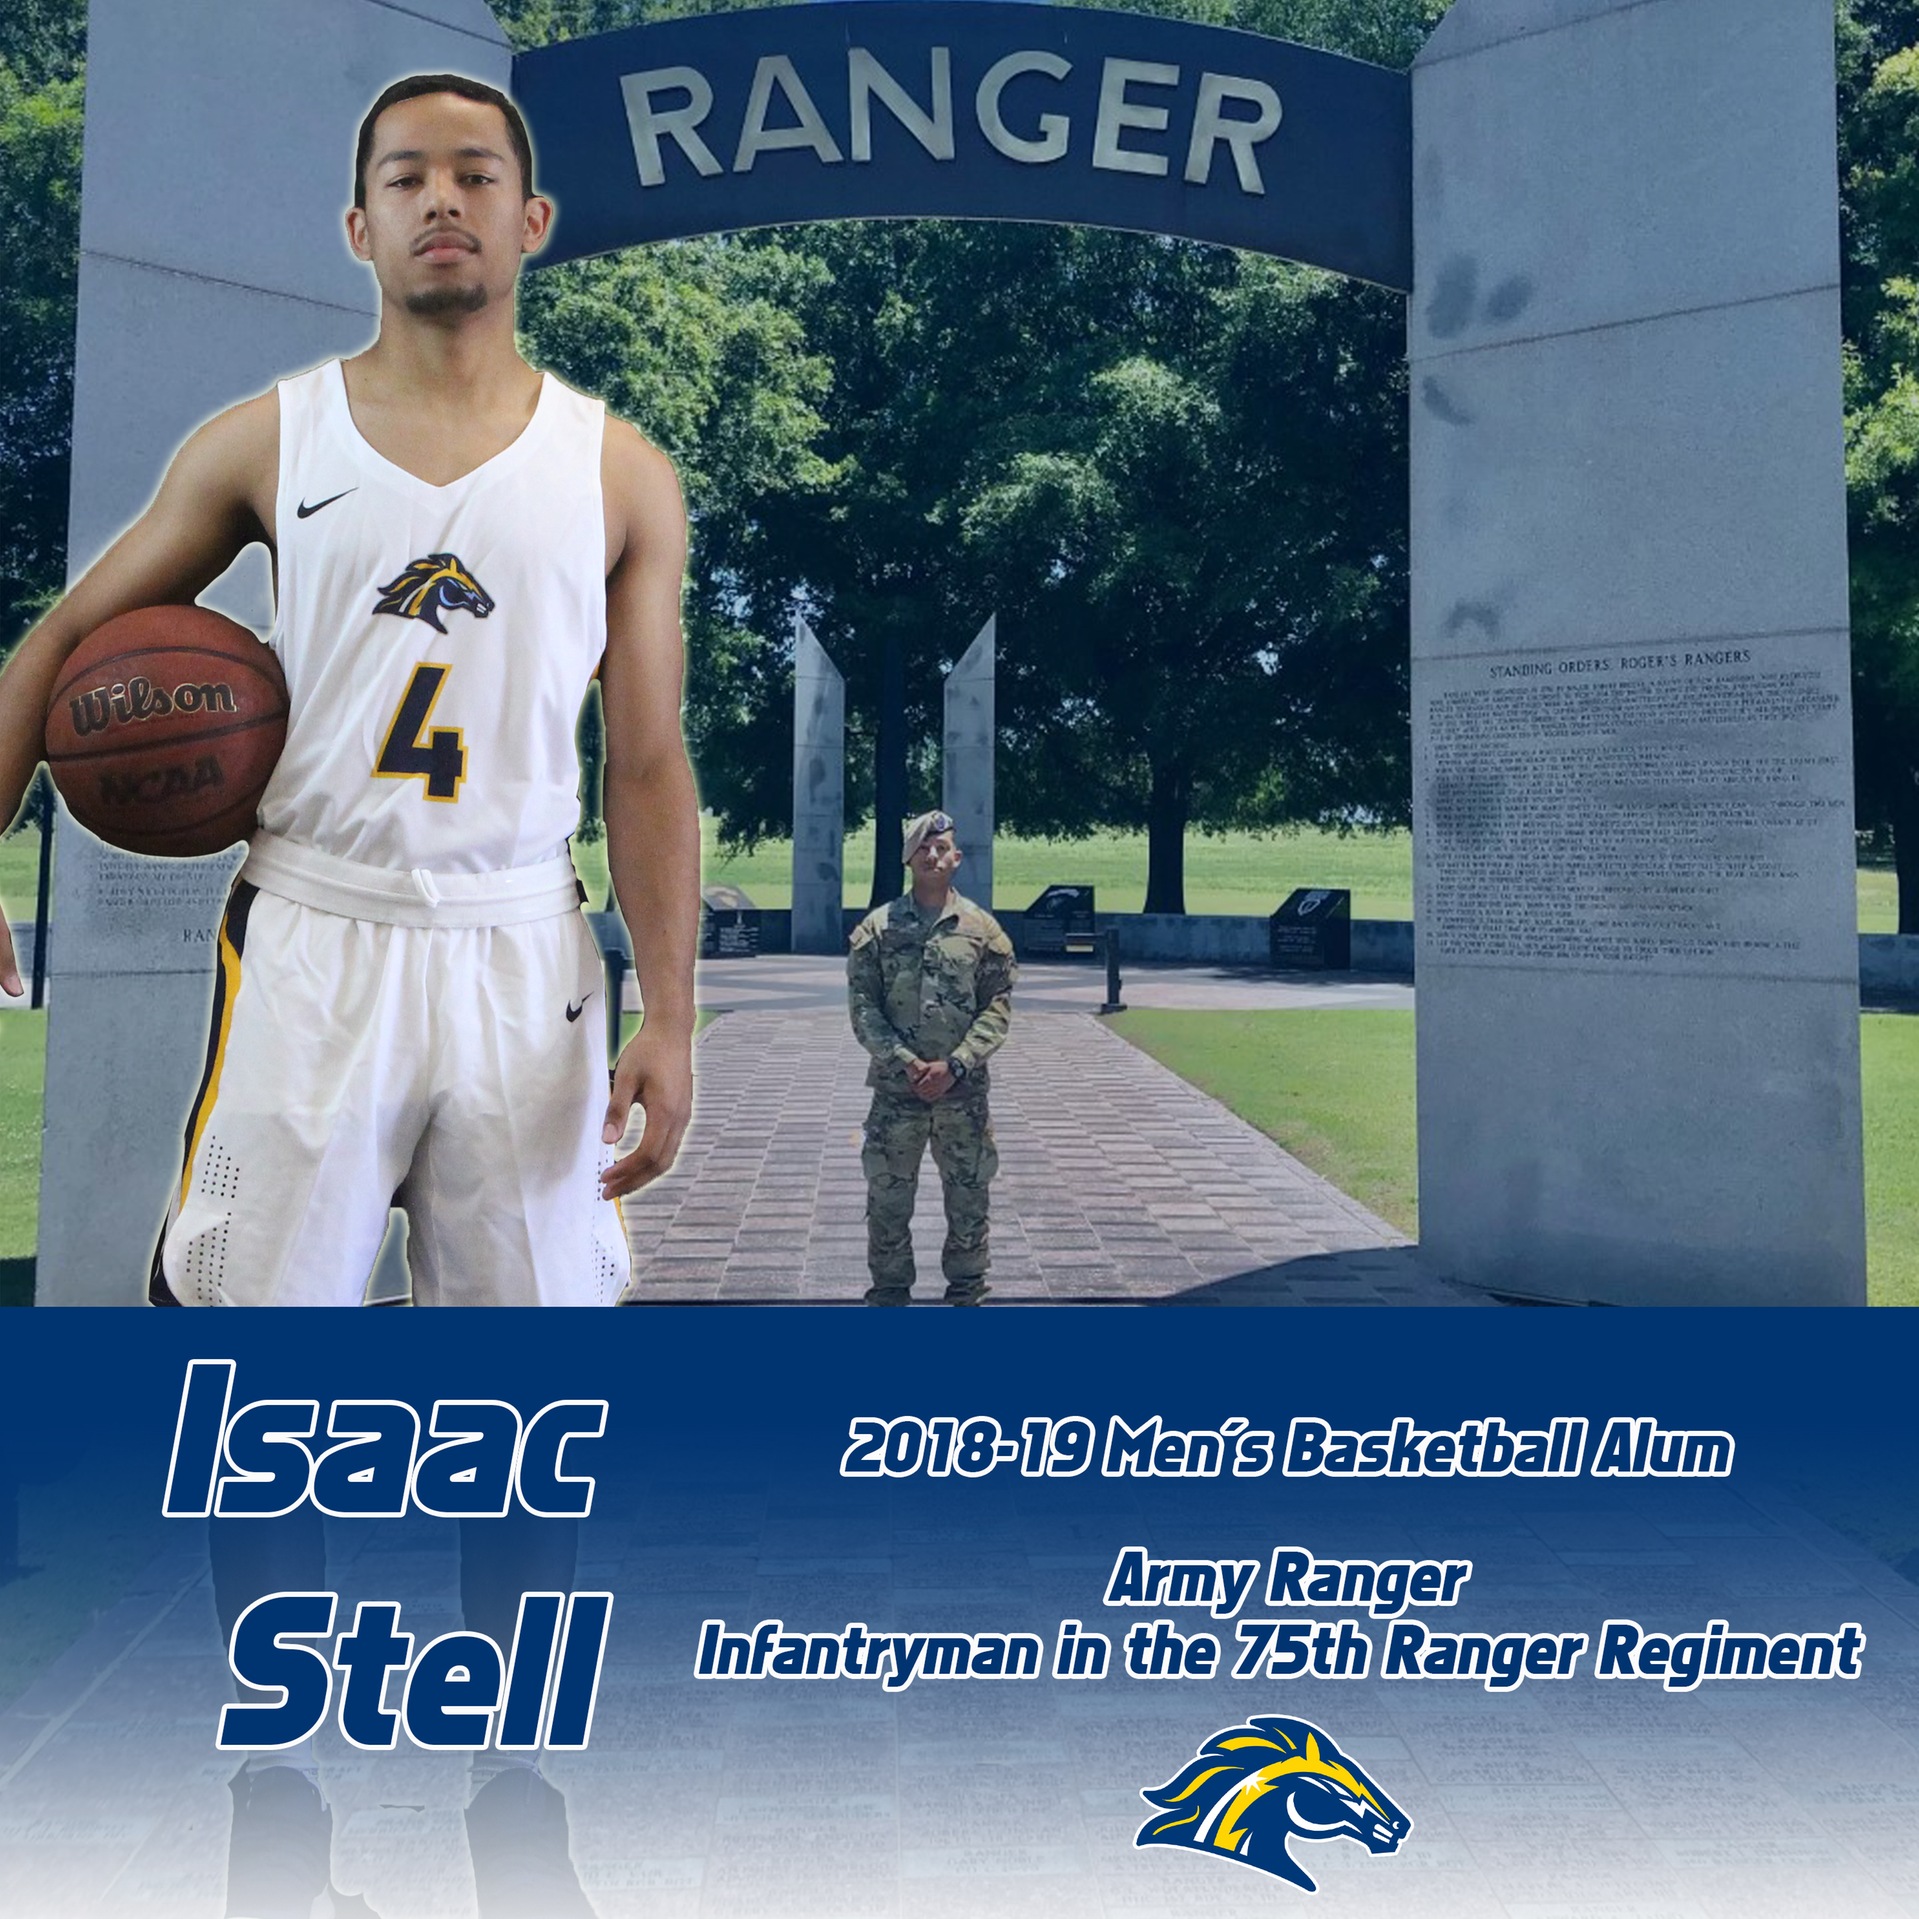 Former Men's Basketball Player, Now Army Ranger, Isaac Stell Shares His Story